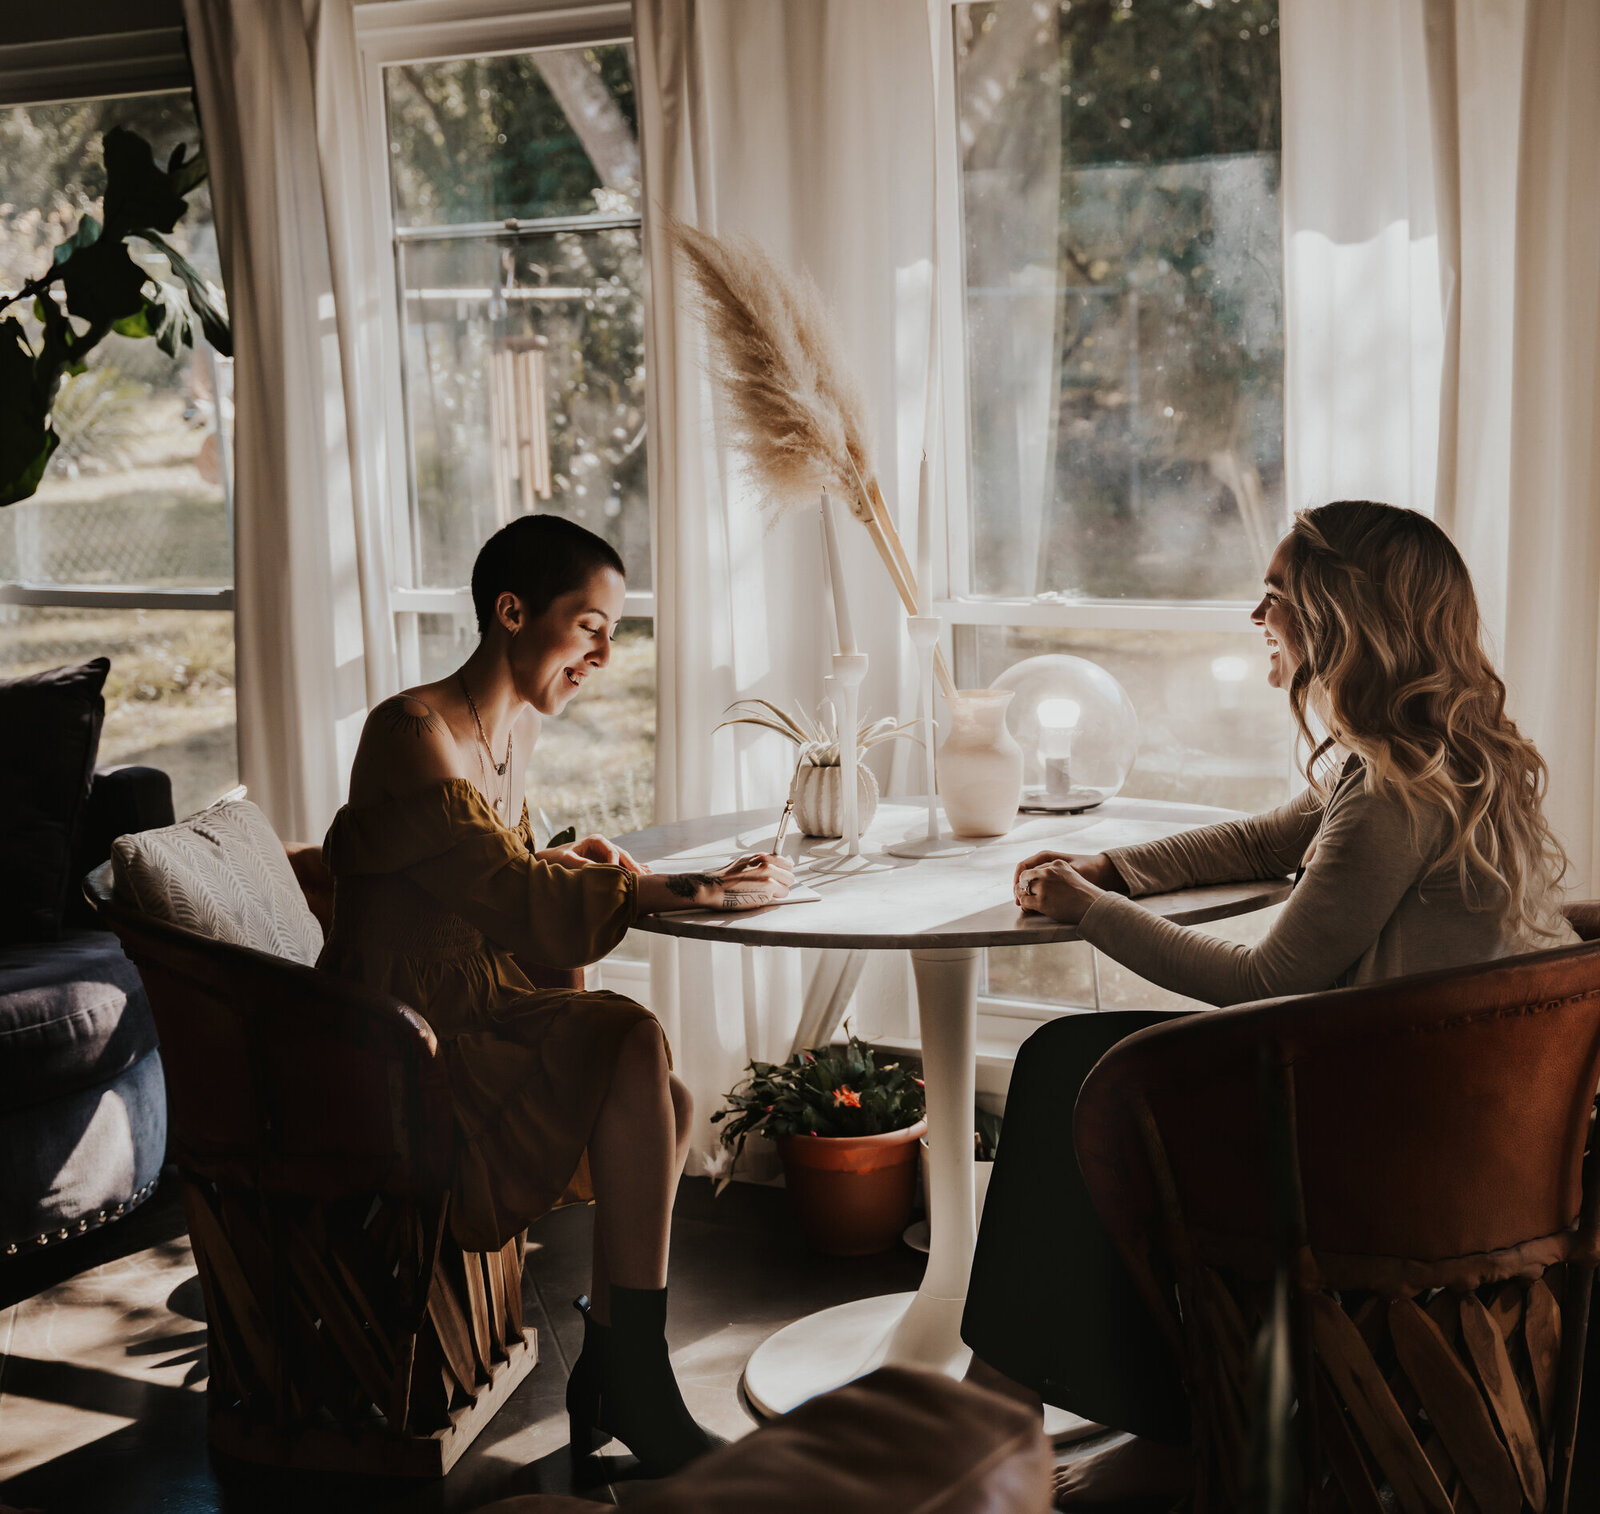 Branding Photographer, two women sit at a table talking, one woman is taking notes